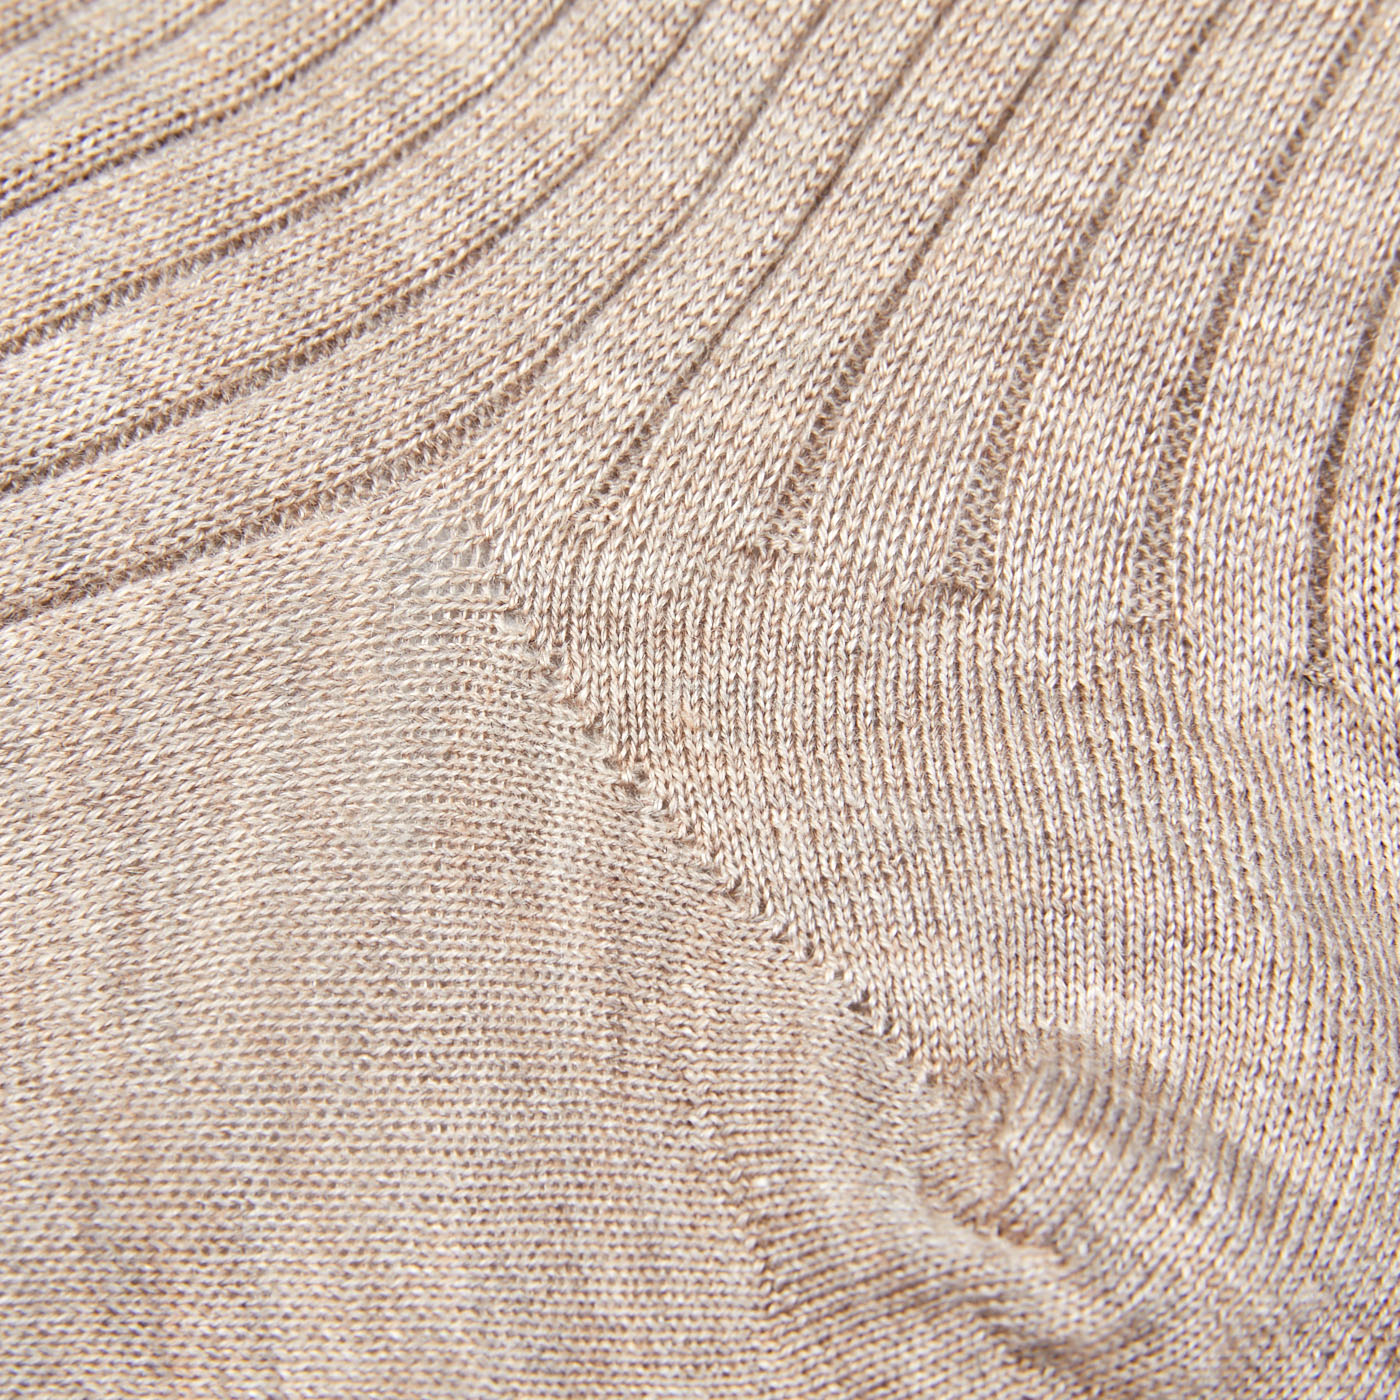 A close up of a pair of Canali Light Beige Cashmere Silk Ribbed Socks.